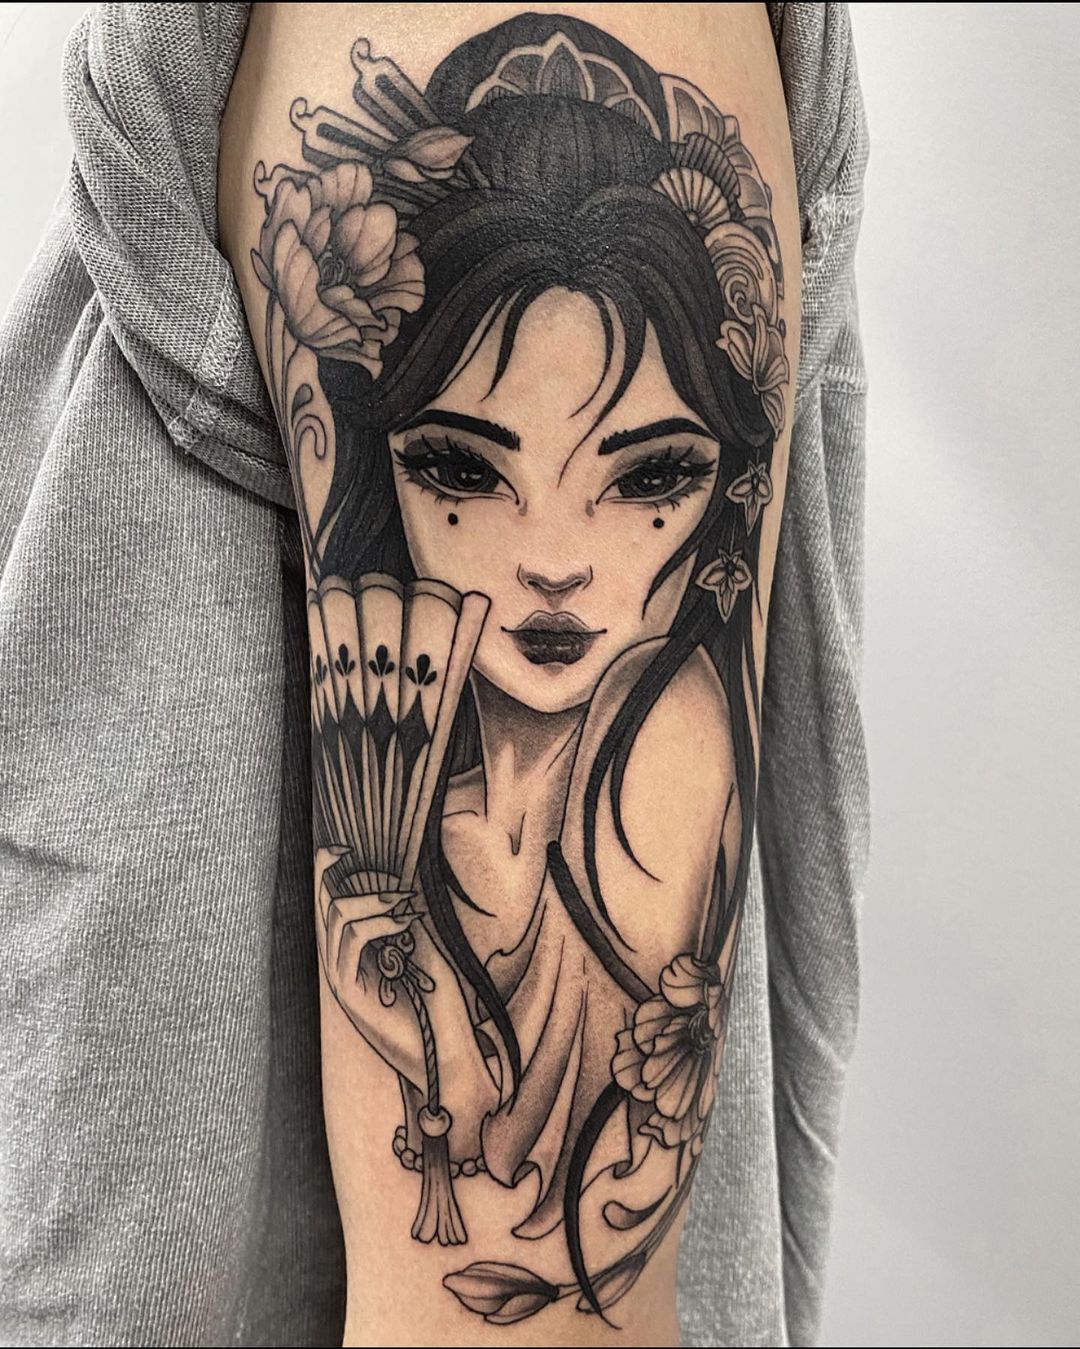 UPDATED] 40 Japanese Temple Tattoos